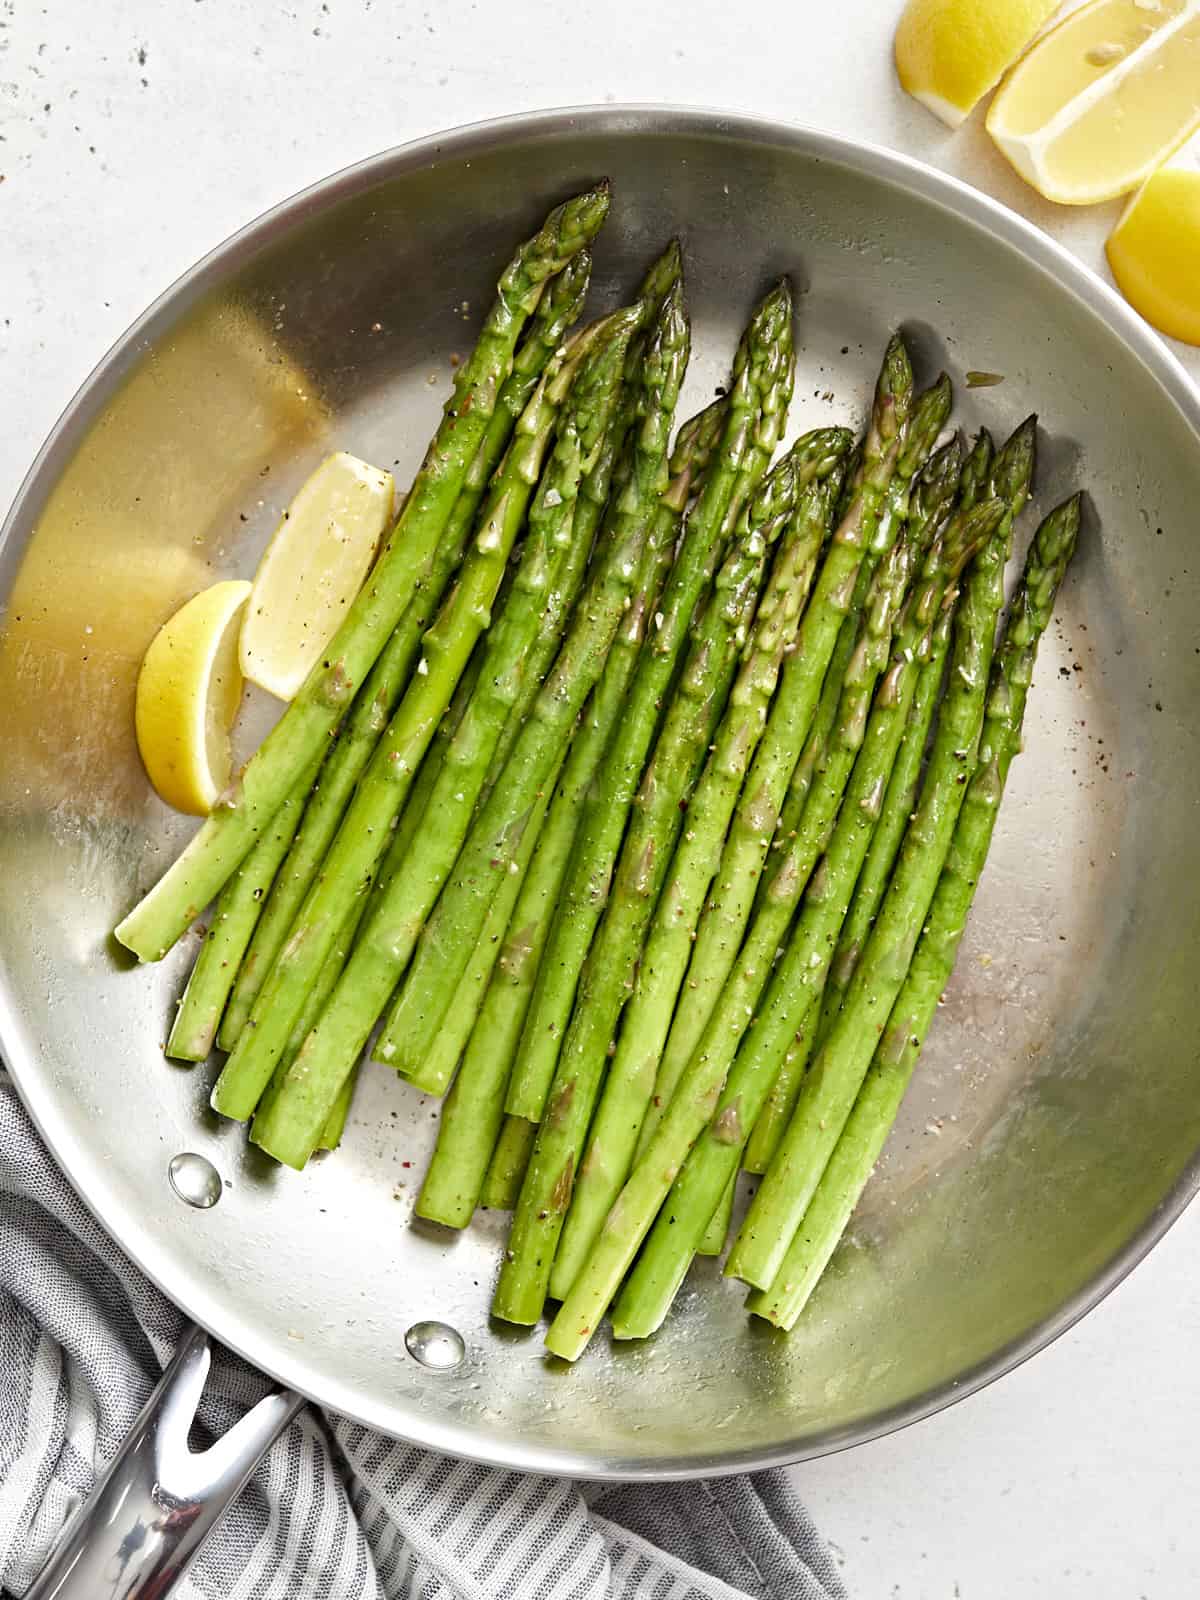 Top view of sautéed asparagus in a skillet with lemon wedges.